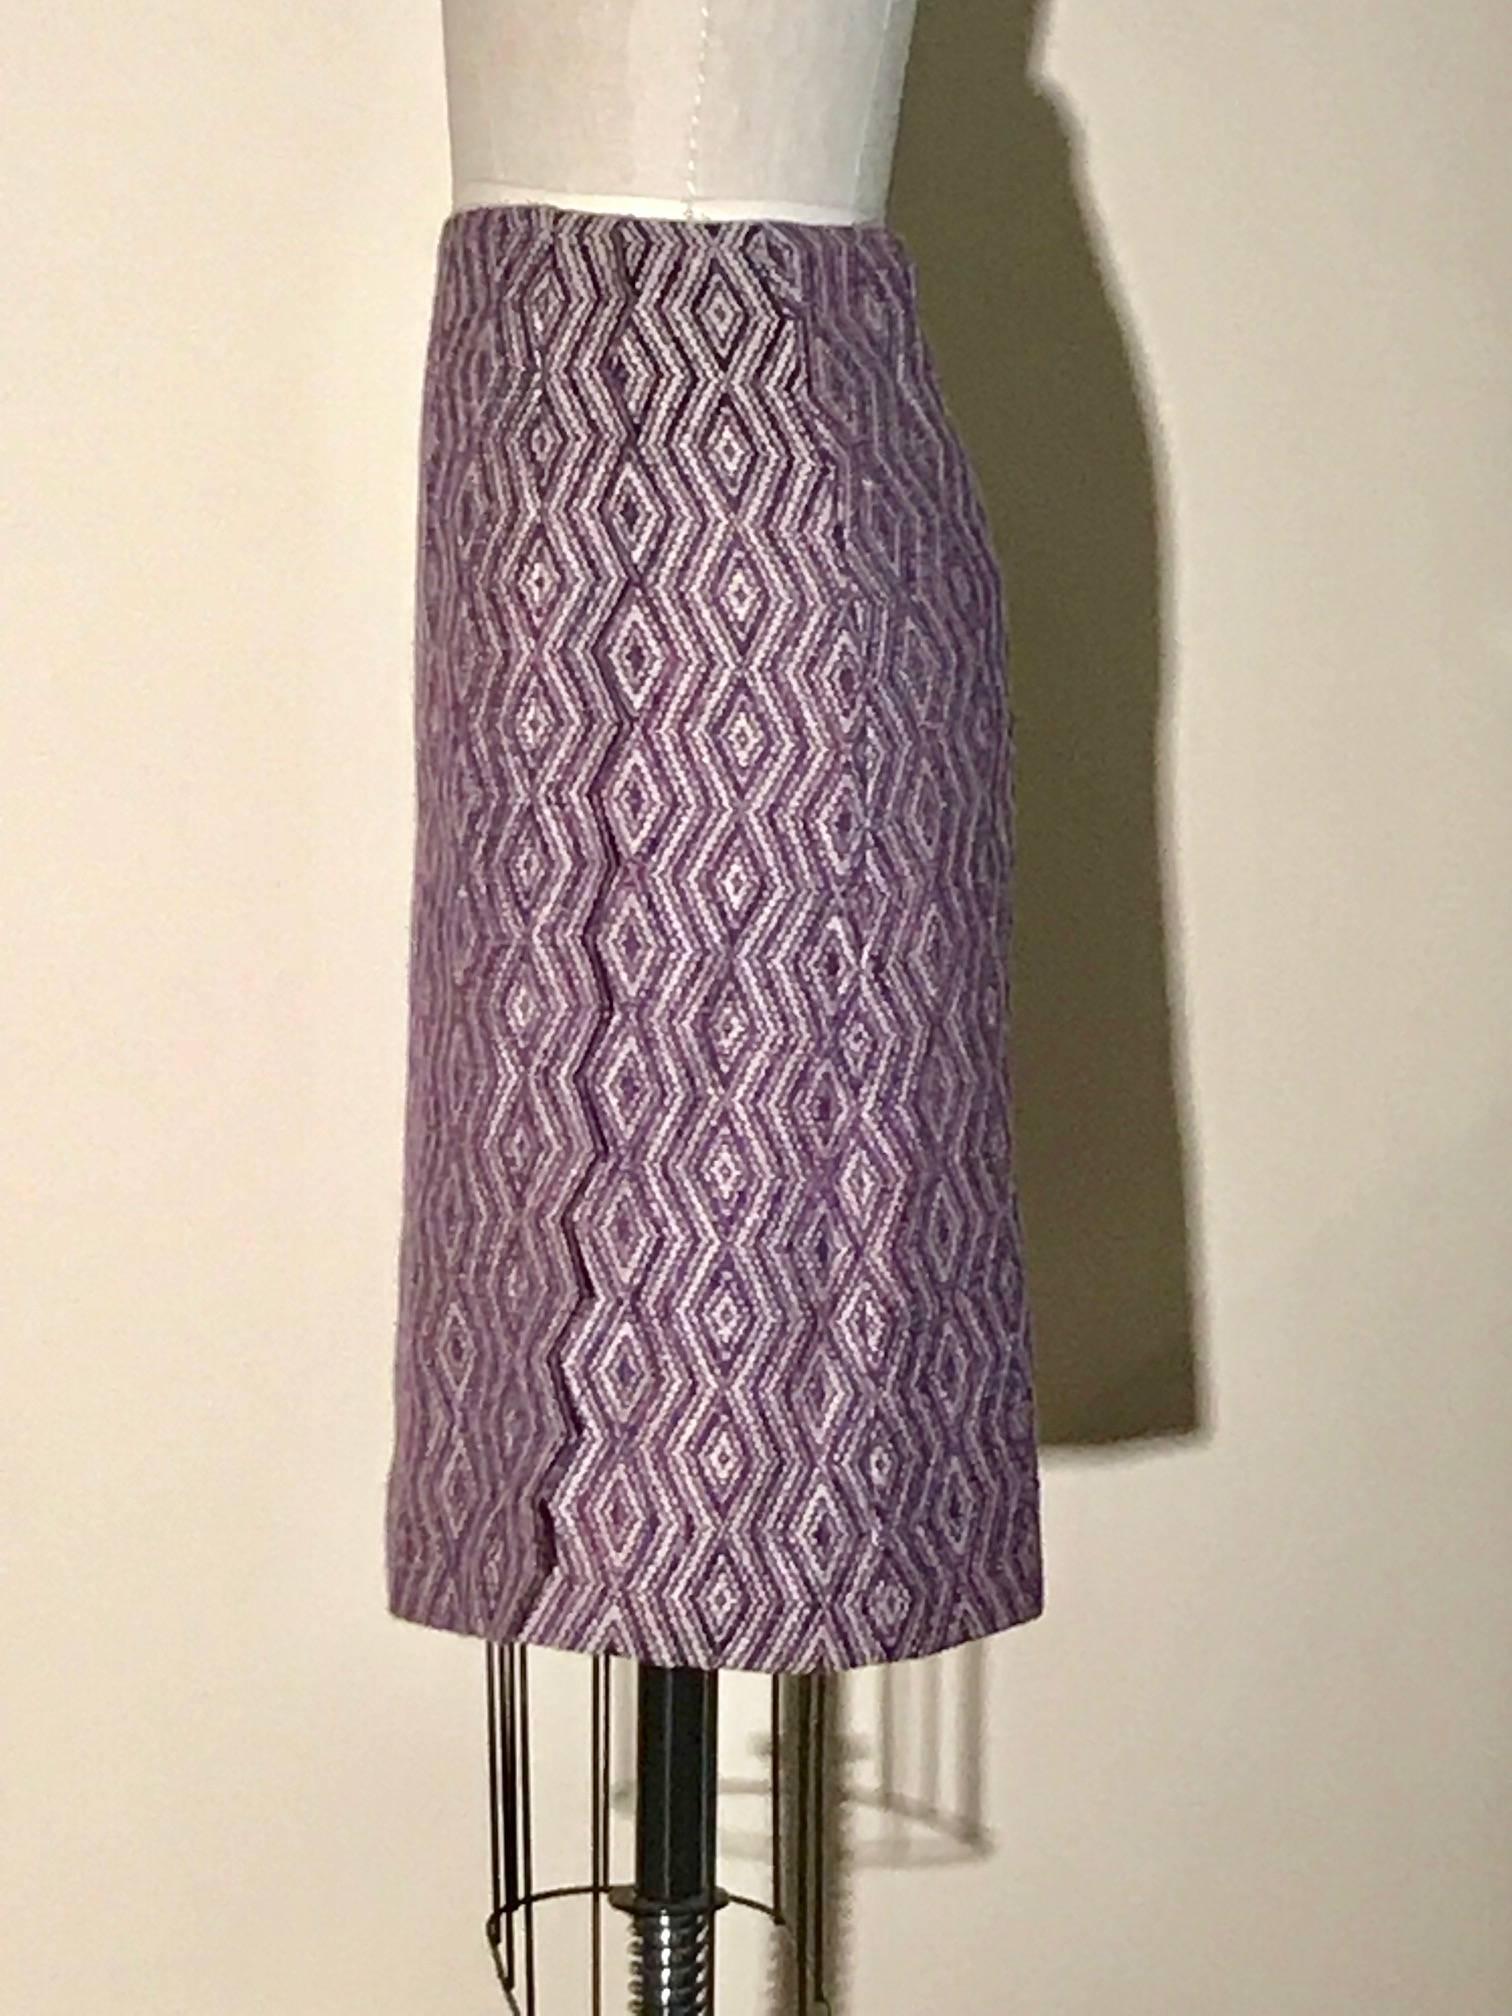 Chanel purple diamond weave pencil skirt with a strip of zig zag cut trim at front and back side. Purple printed silk with clover pattern from lining peeks out from beneath the zig zag cut trim. Fastens with zip and hook and eye at side-back. 

74%